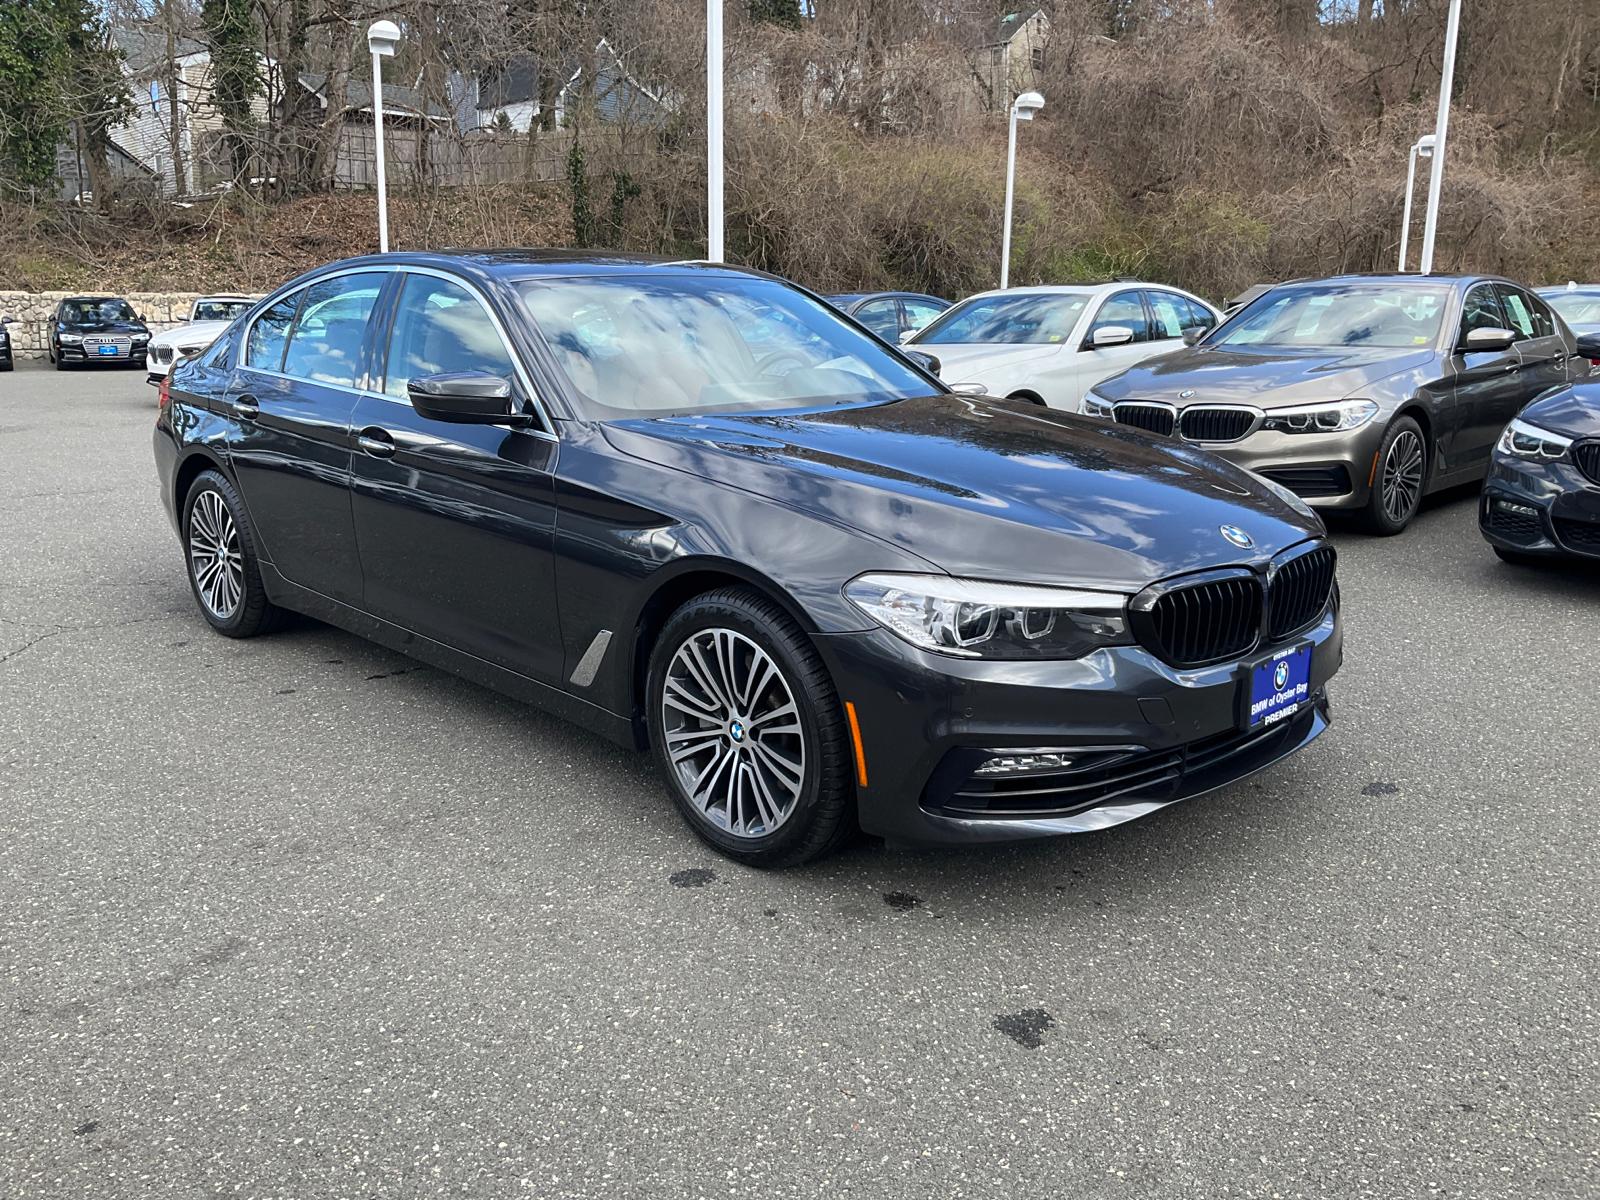 Used Bmw 5 Series Oyster Bay Ny